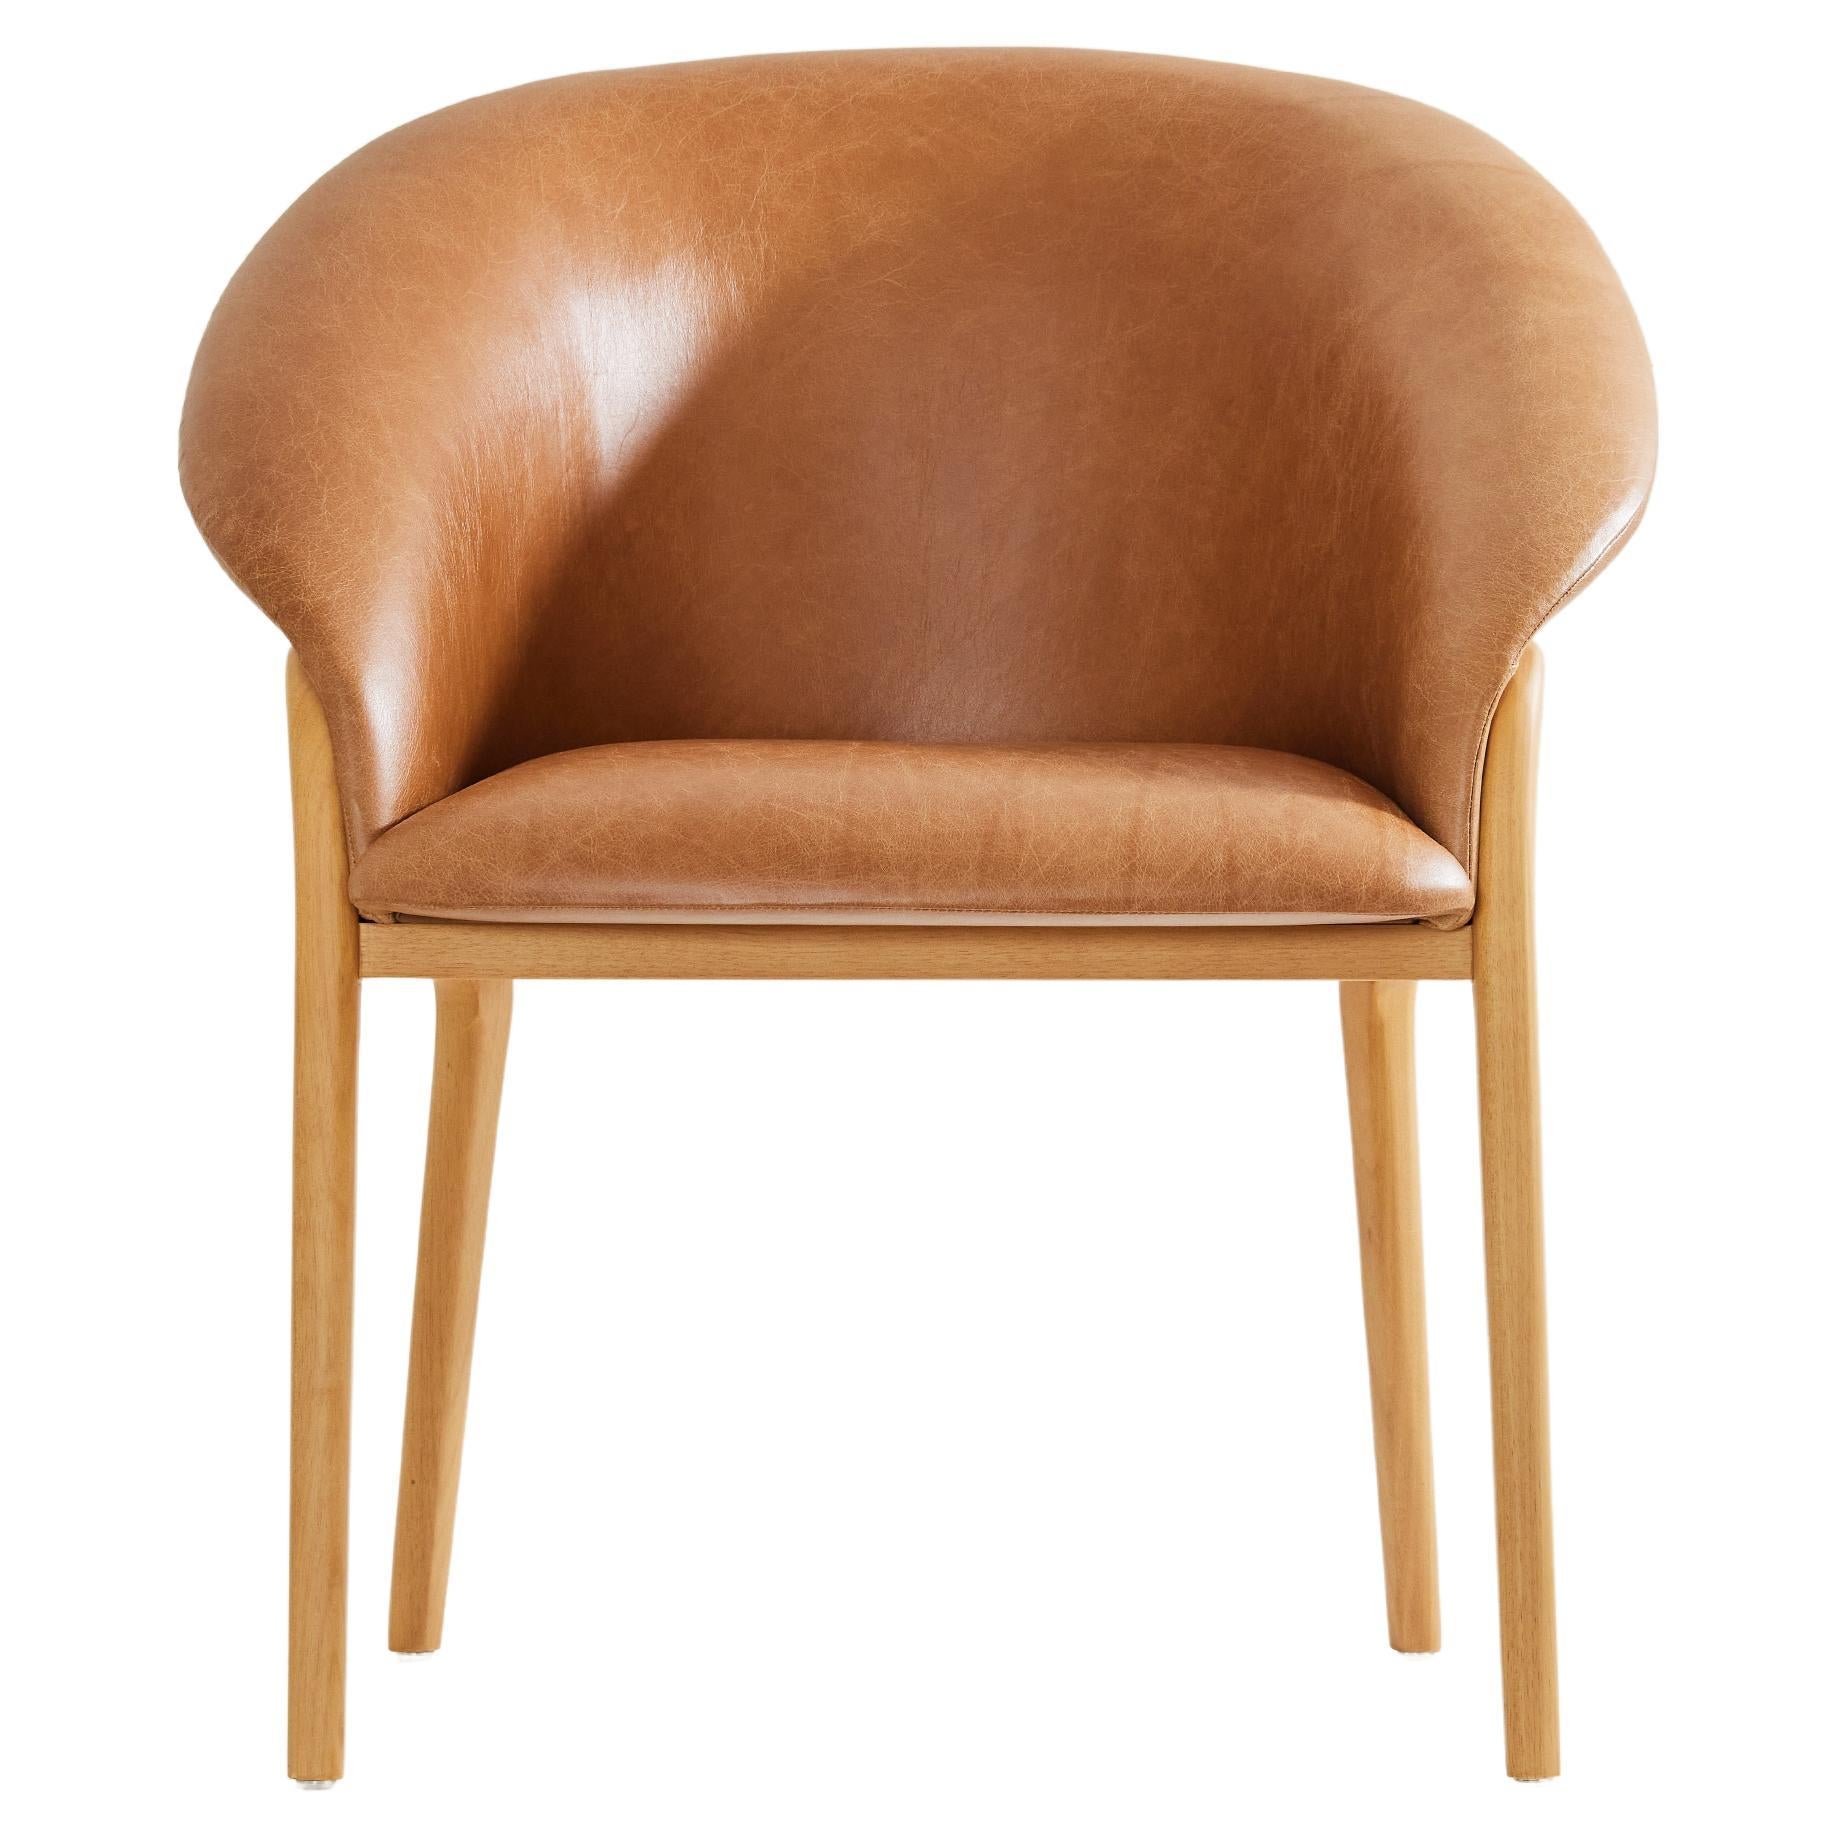 Minimalist Organic Chair in Solid Wood, camel leather Seating tone For Sale